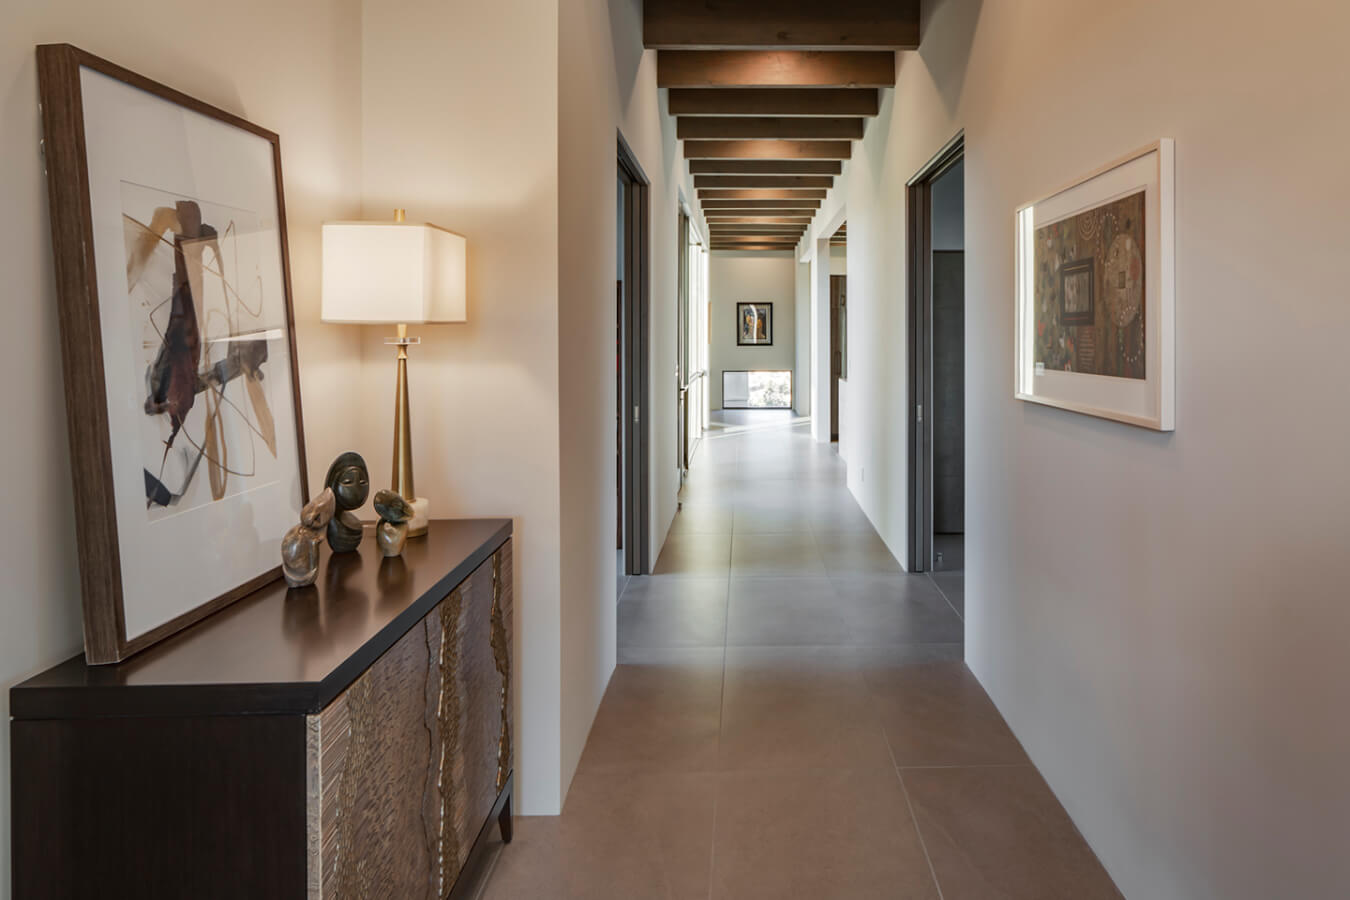 A Santa Fe-inspired hallway in a modern home with wooden flooring, designed by an architect and built by a home builder.